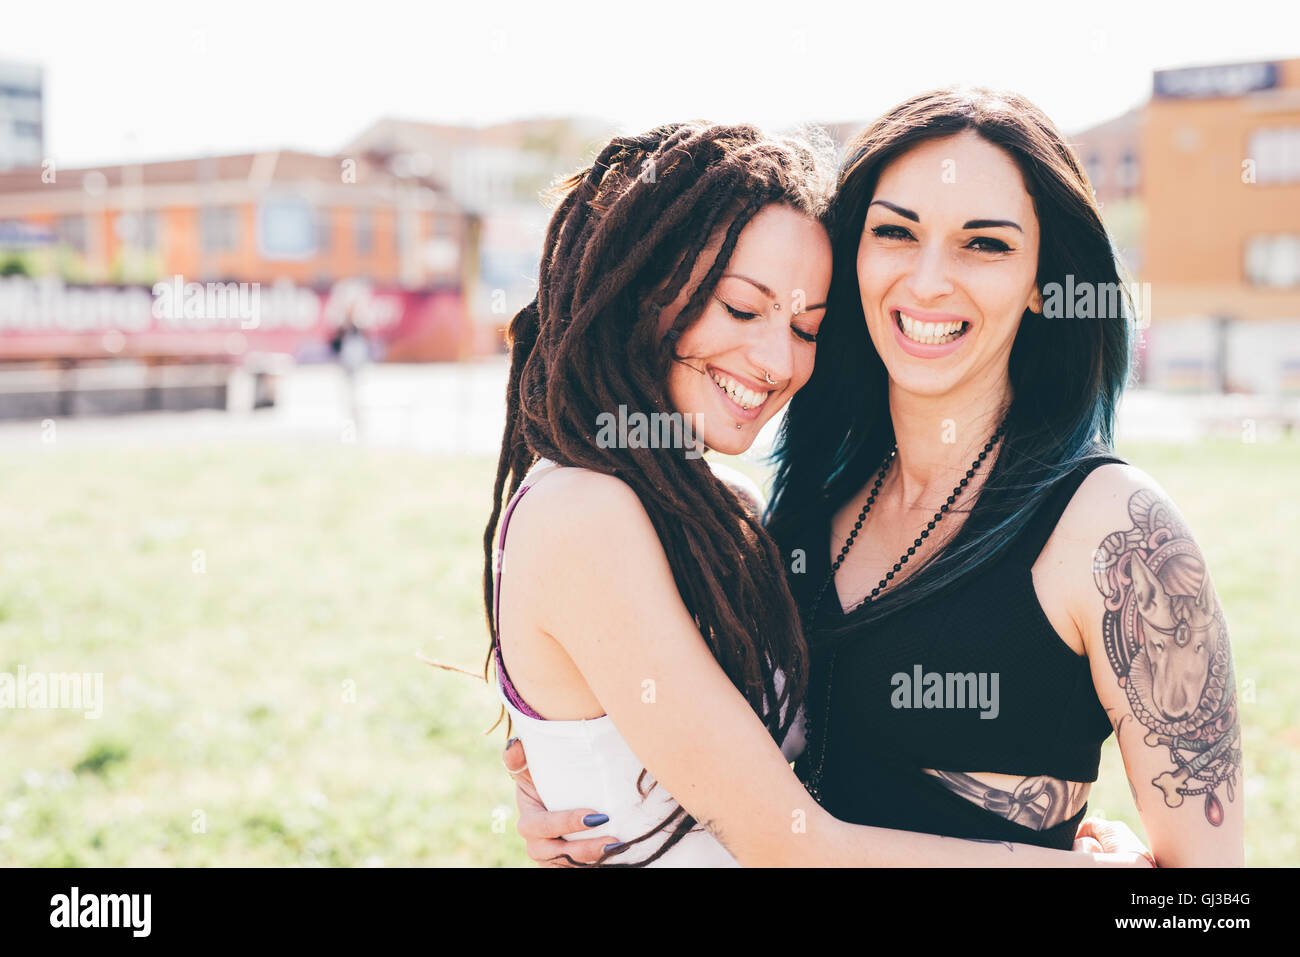 Portrait of tattooed young women in urban park Stock Photo